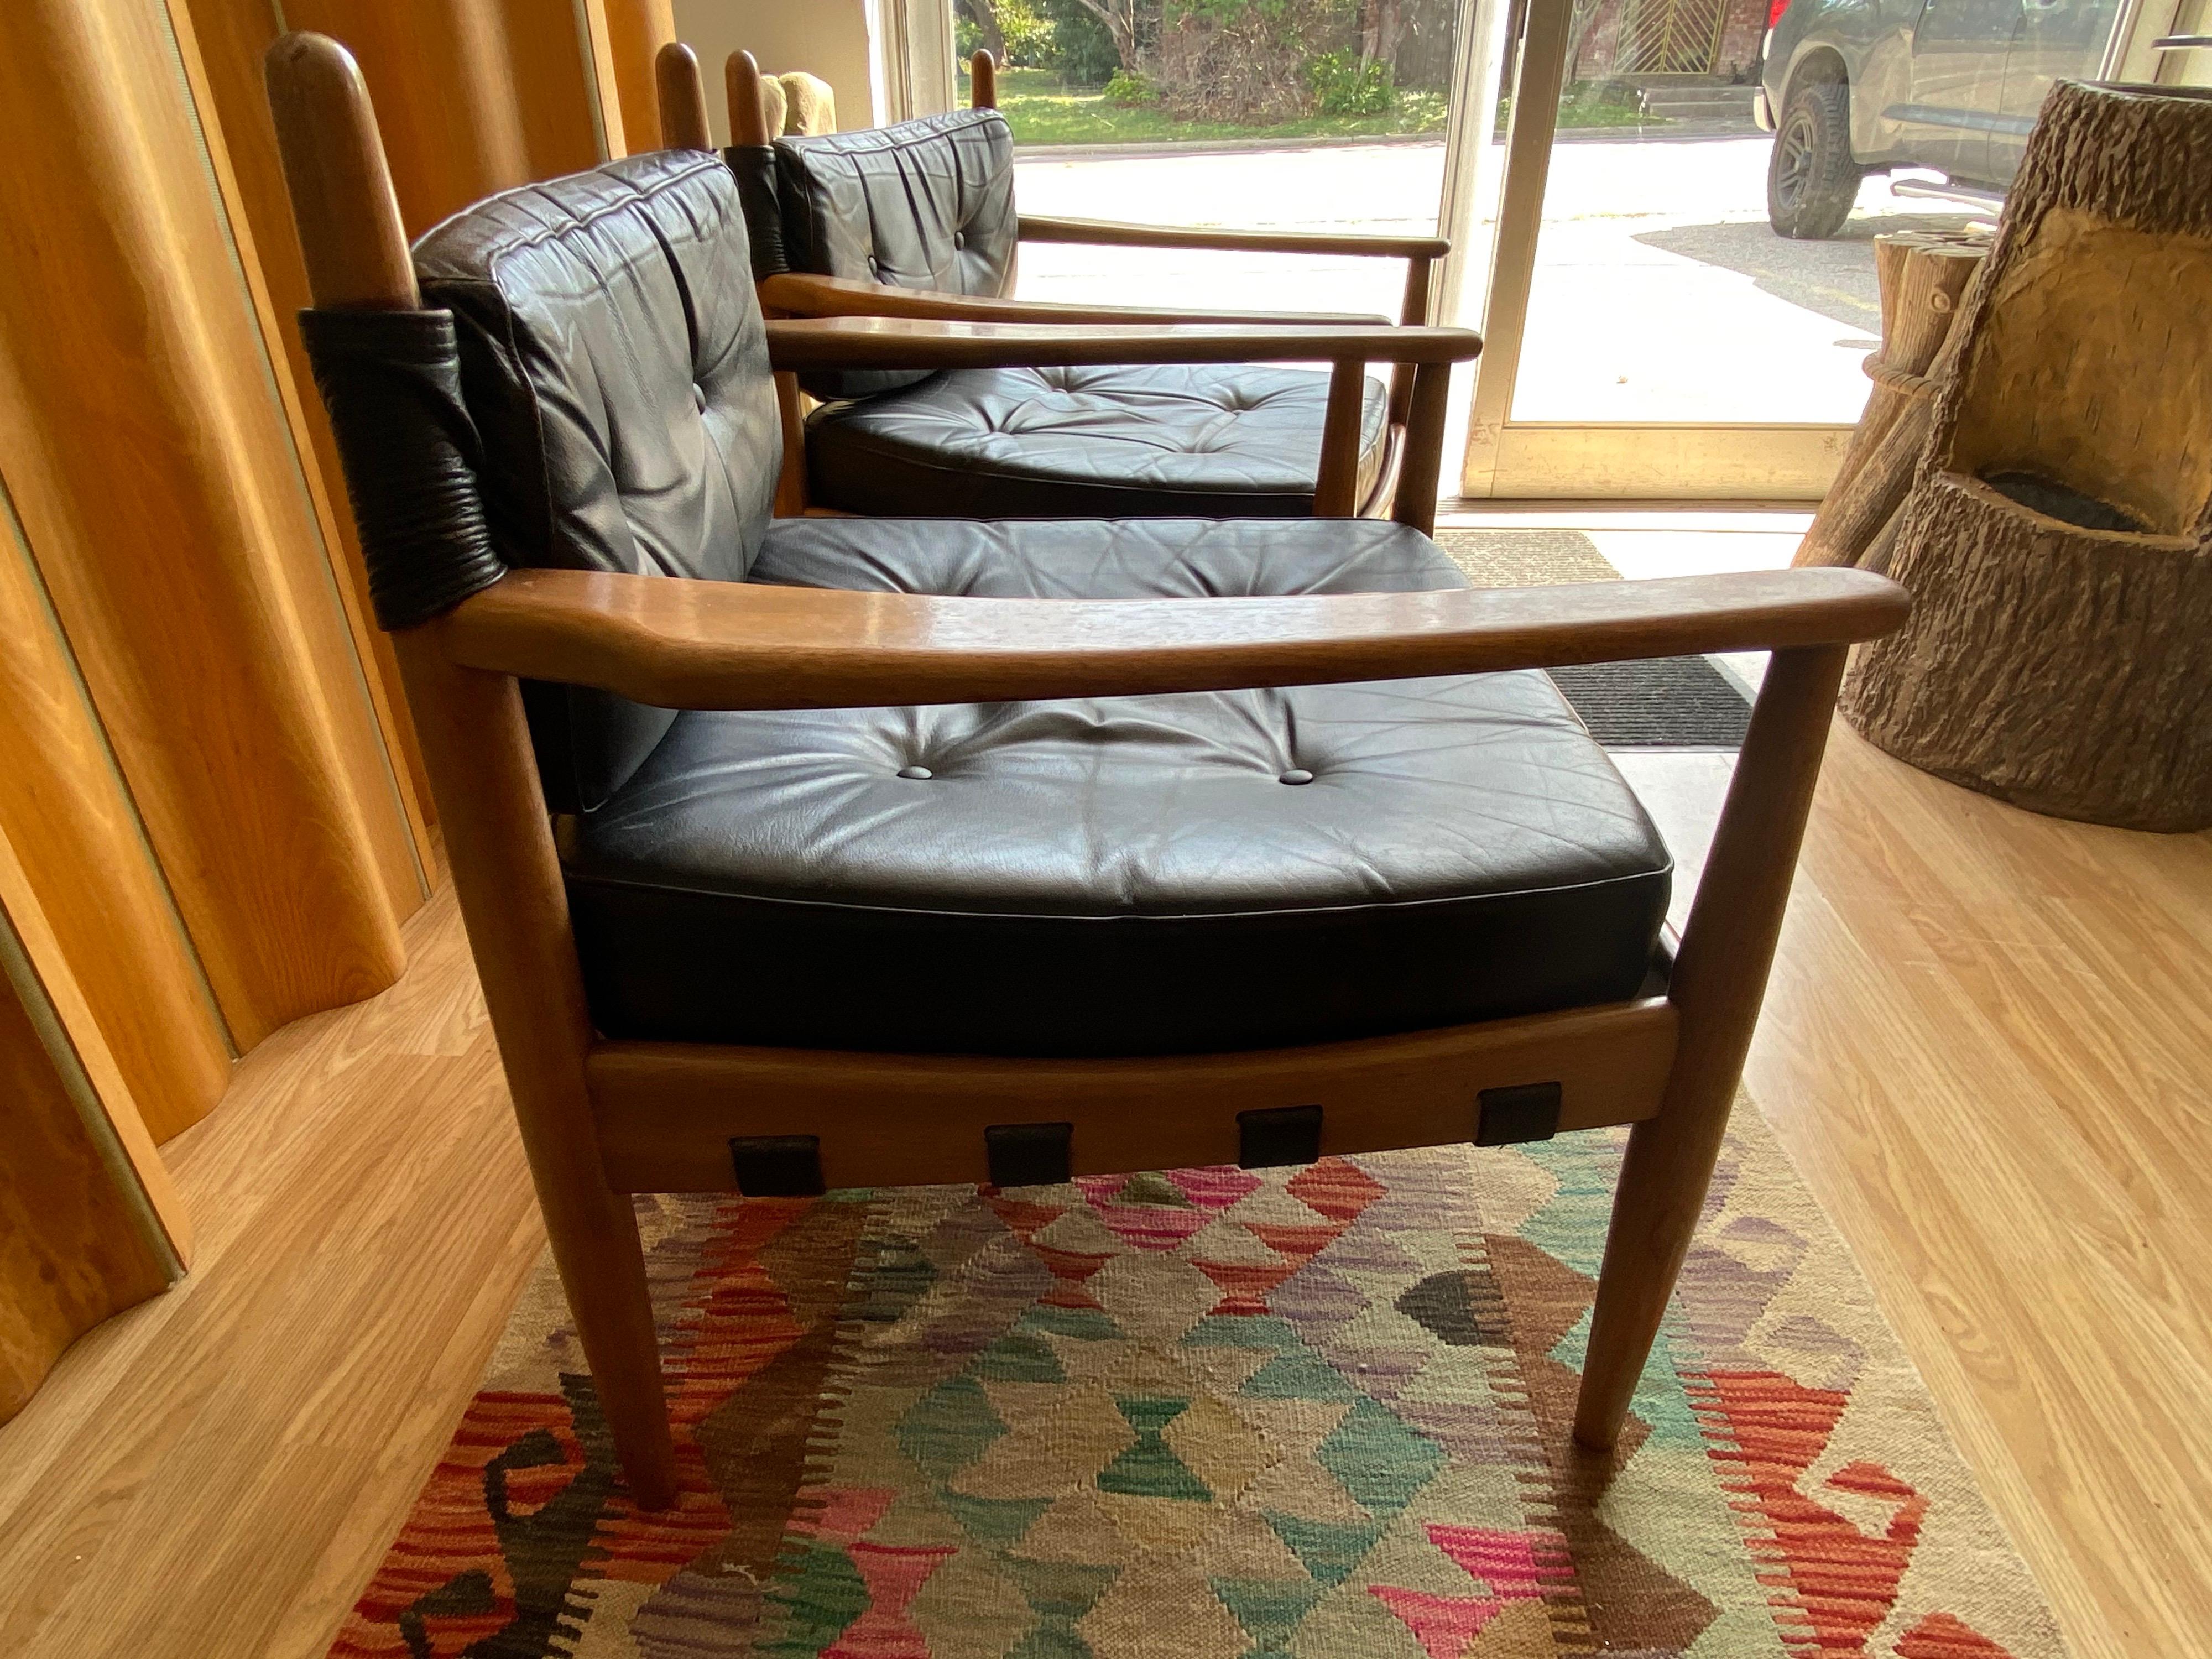 Beautiful pair of Mid-Century Modern leather lounge chairs designed by Eric Merthen circa 1960s, features nicely worn leather in black and is made of rosewood. This pair is in great overall vintage condition.